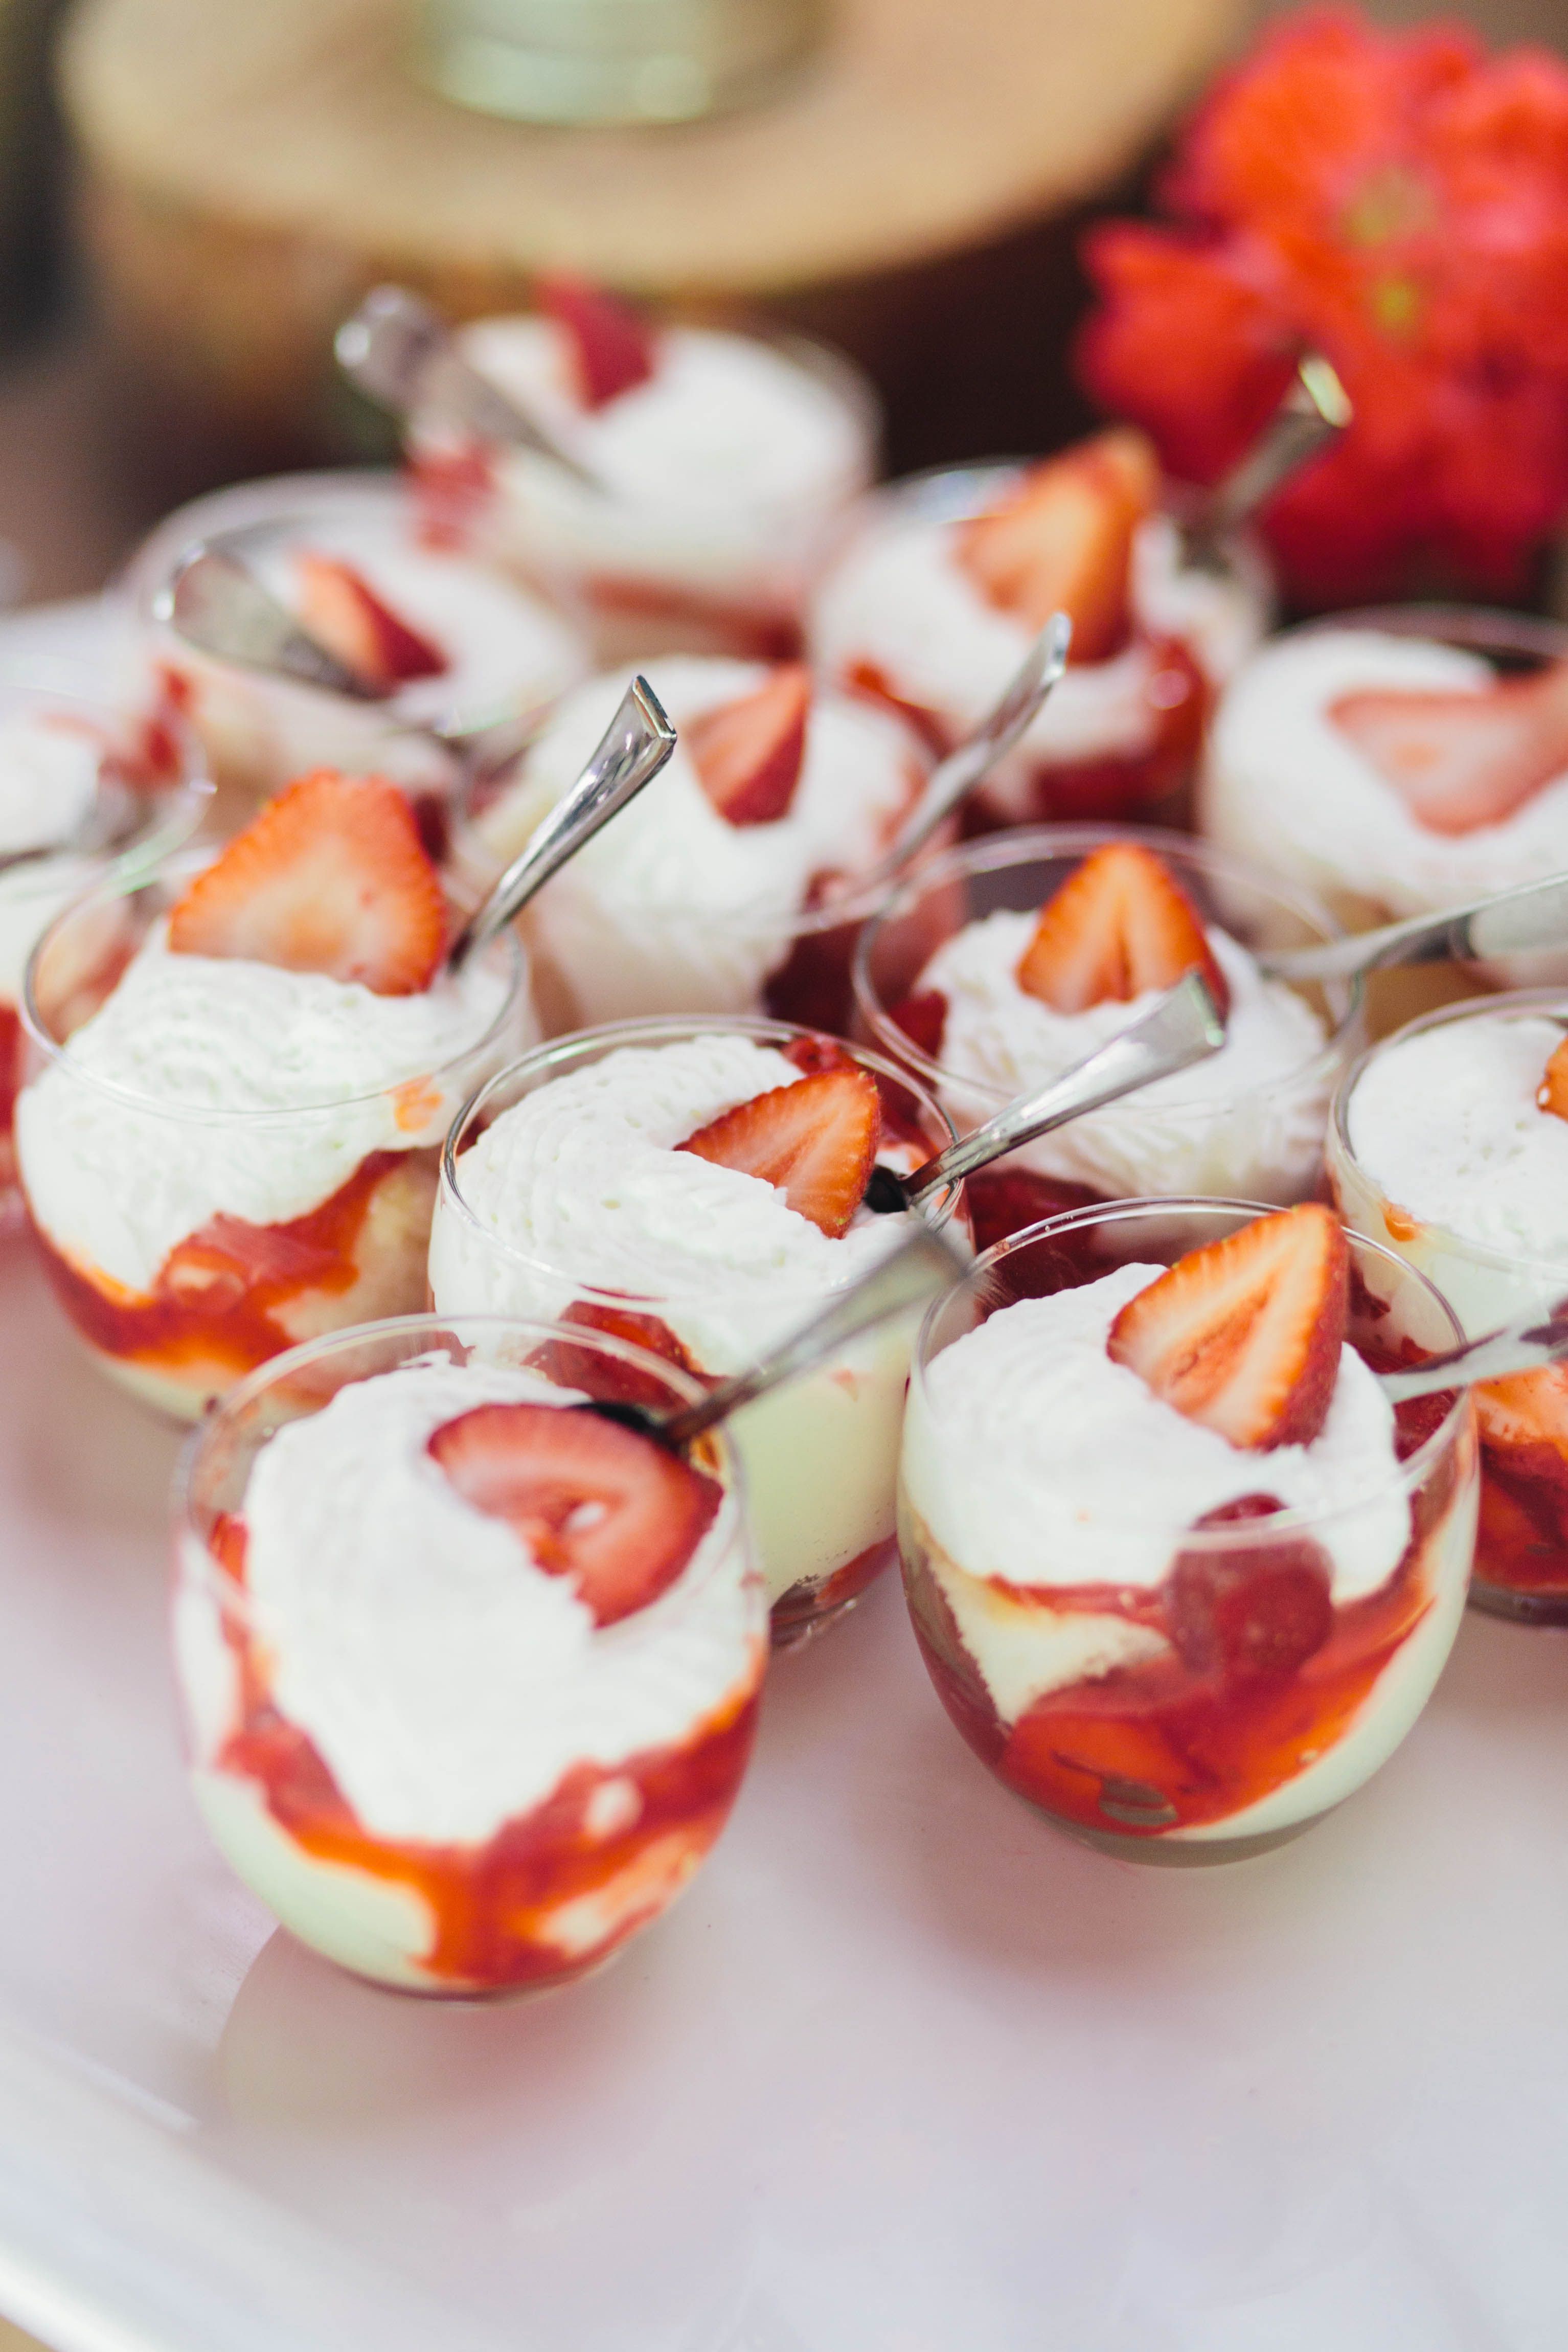 Mother's Day Surprise: Mini Strawberry Shortcake Cups